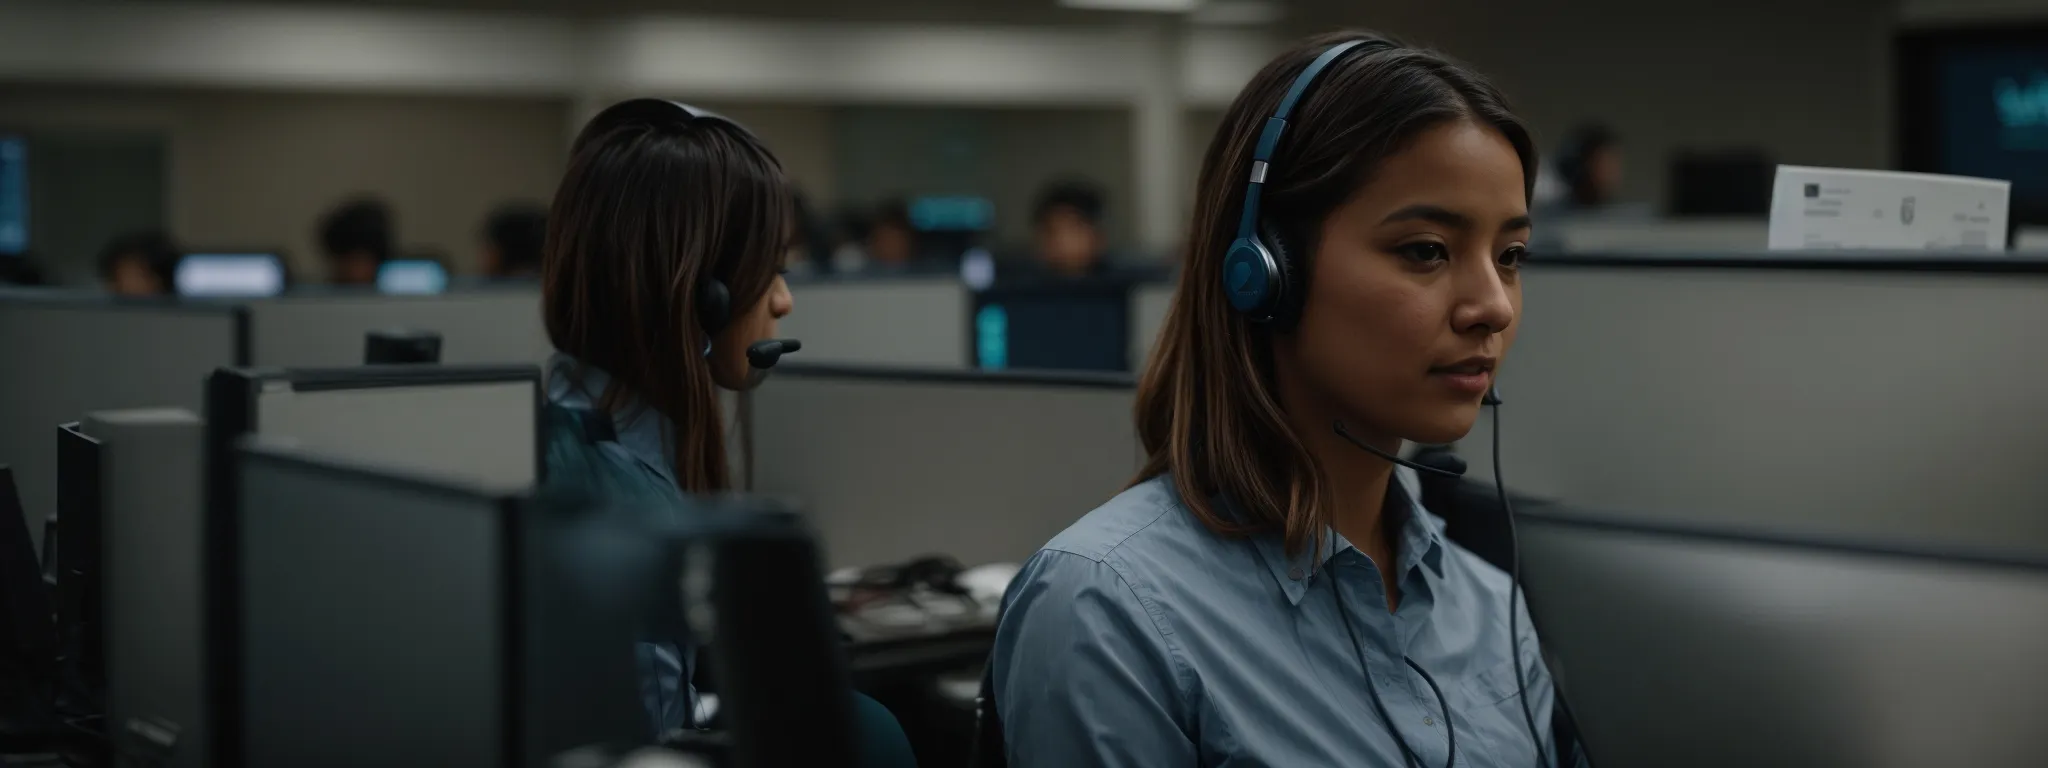 a customer service representative wearing a headset in a call center, ready to assist users with their queries.